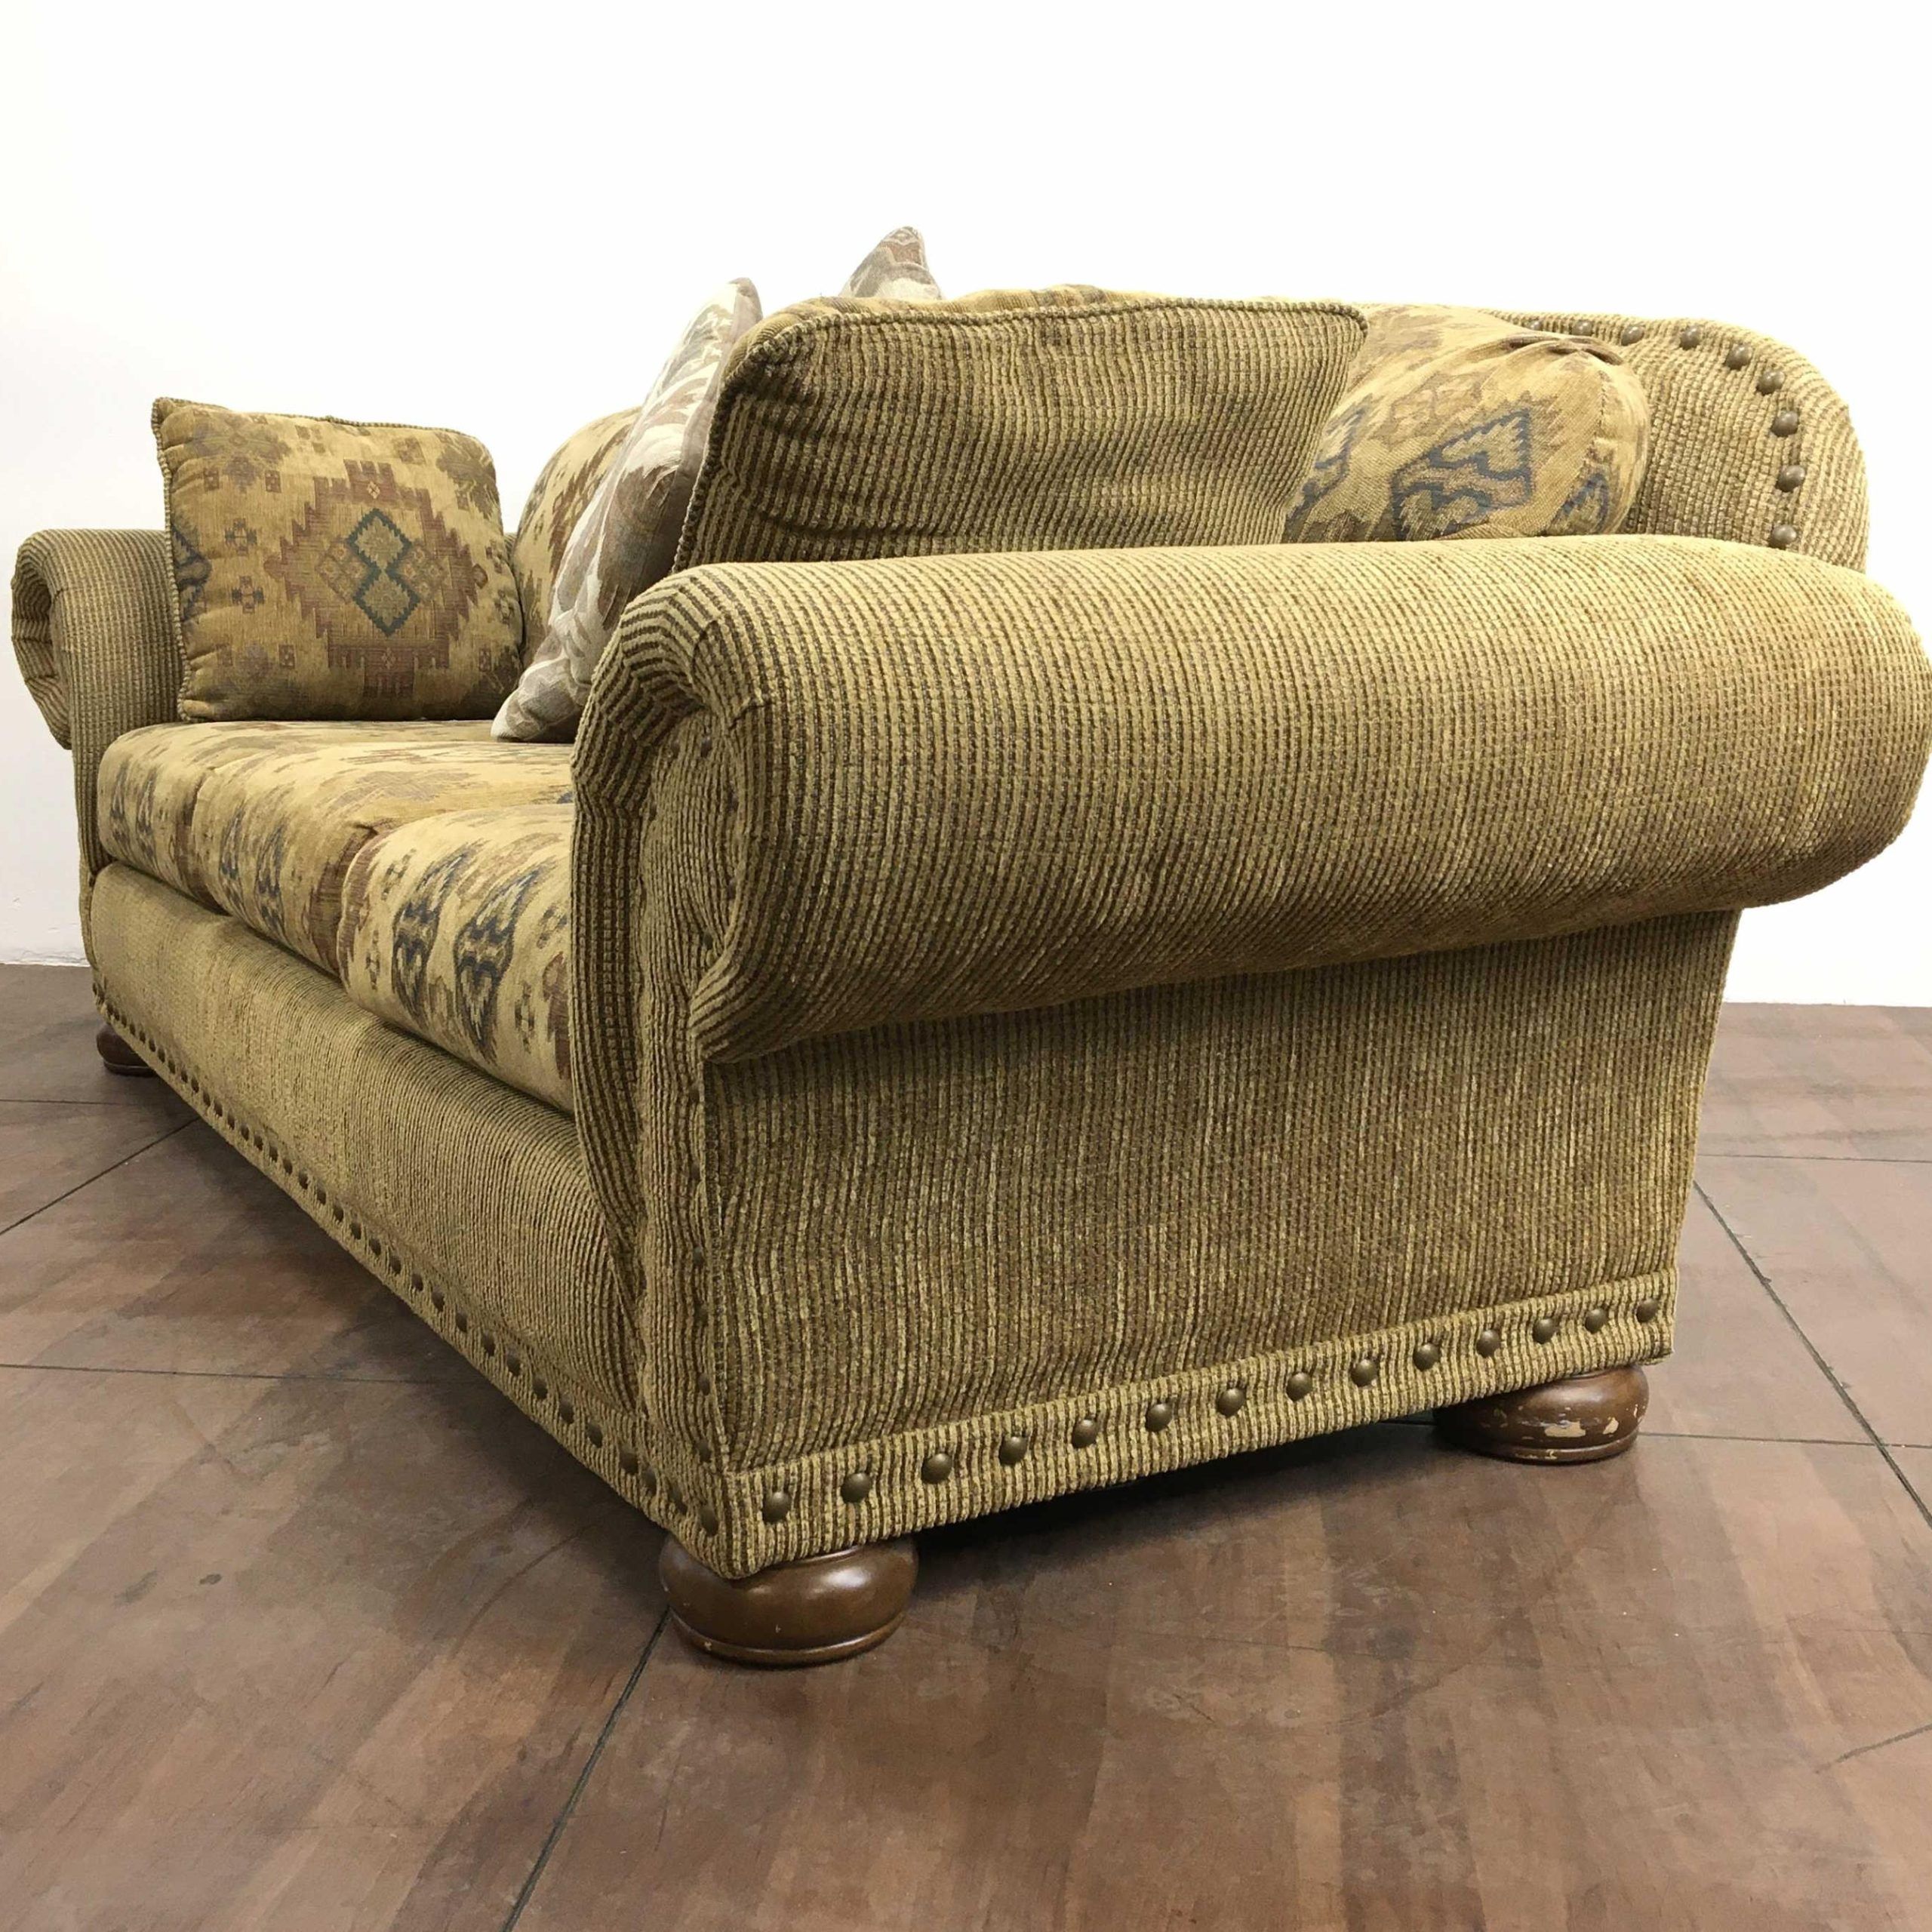 Lot – Traditional Southwestern Style Pillowback Sofa Inside Most Recent Sofas With Pillowback Wood Bases (View 8 of 15)